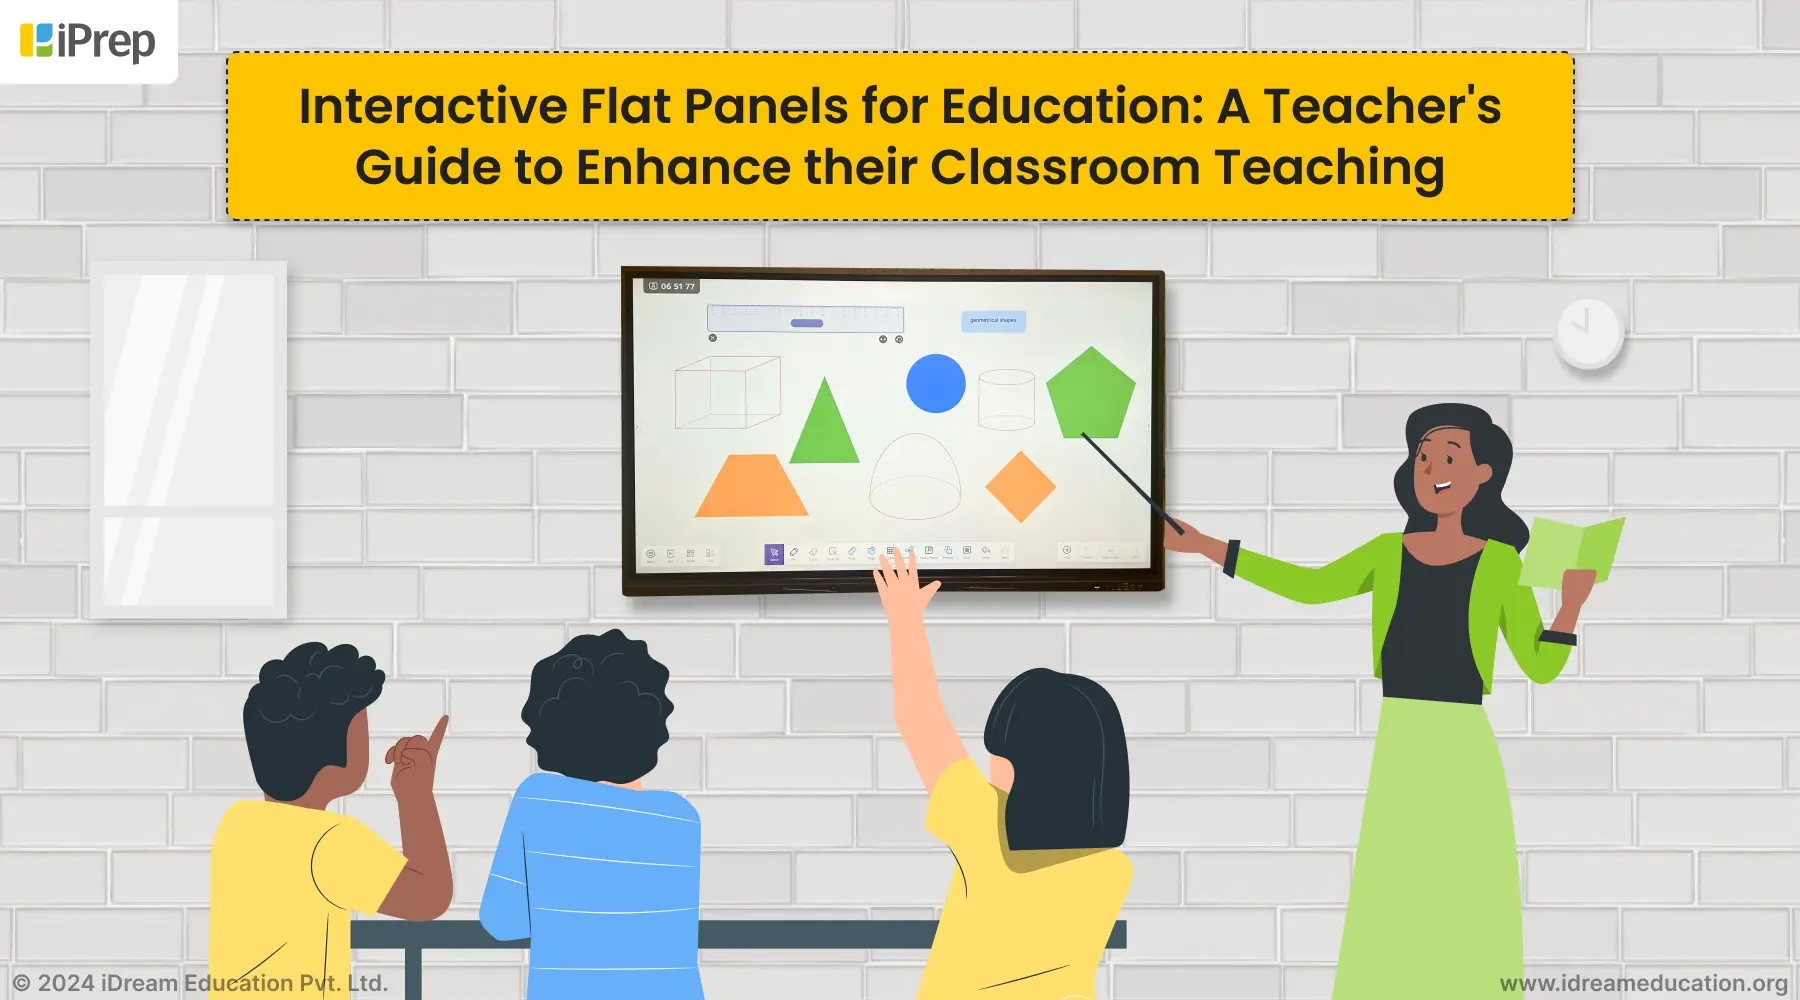 Illustration of teacher teaching through Interactive Flat Panels for education by iDream Education